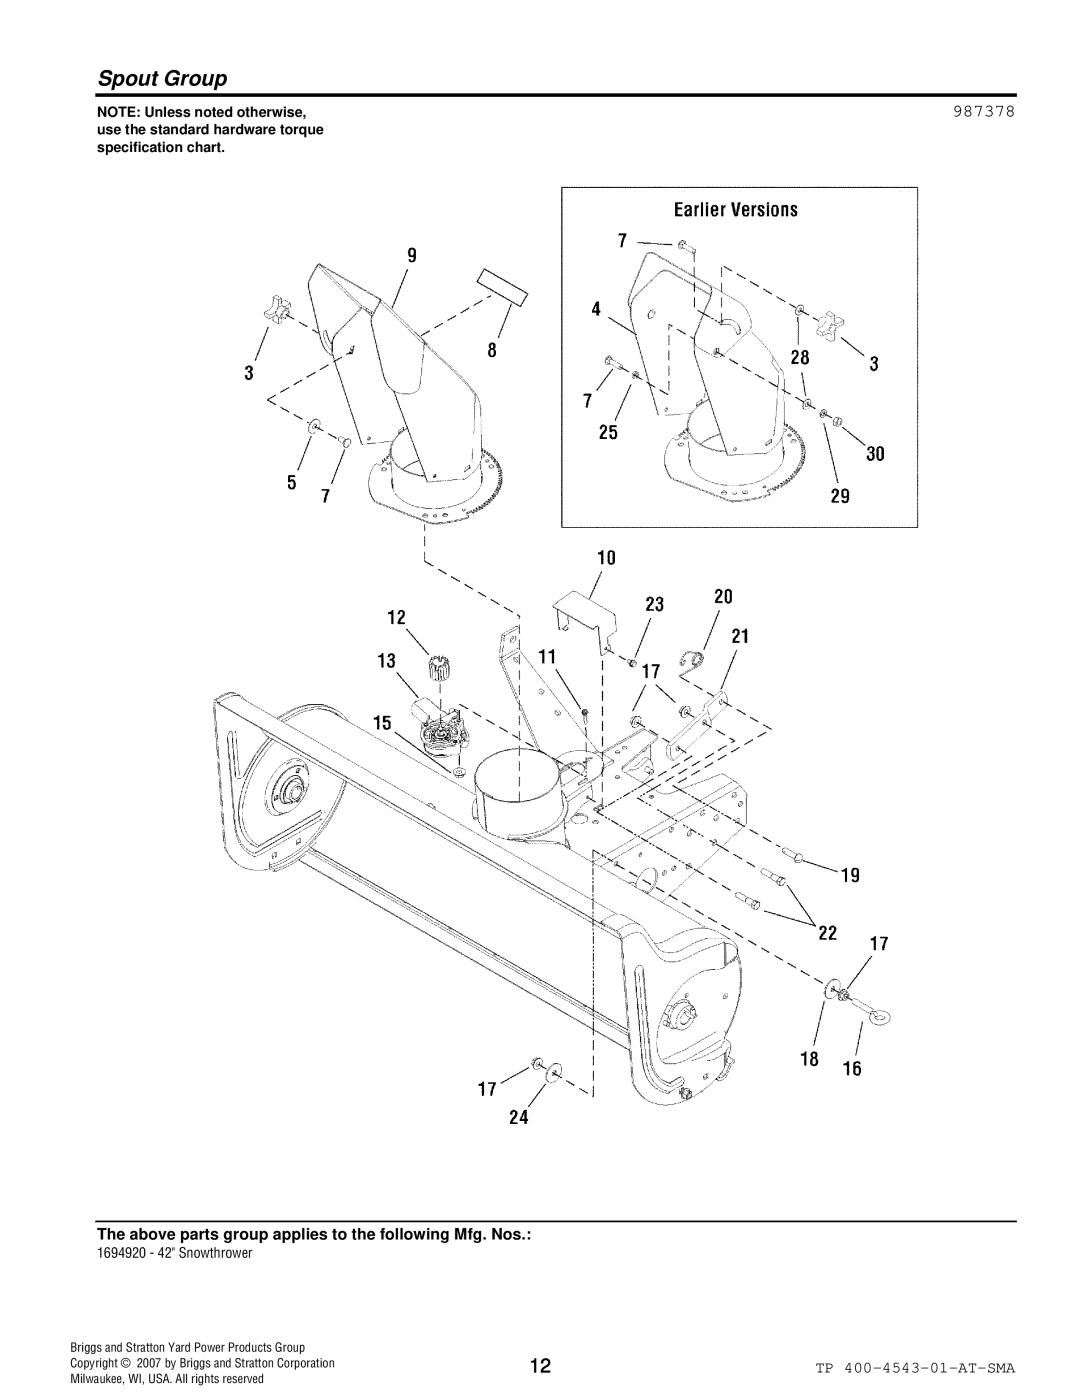 Simplicity 1694920 manual Spout Group, 987378, NOTE Unless noted otherwise, Briggs and Stratton Yard Power Products Group 